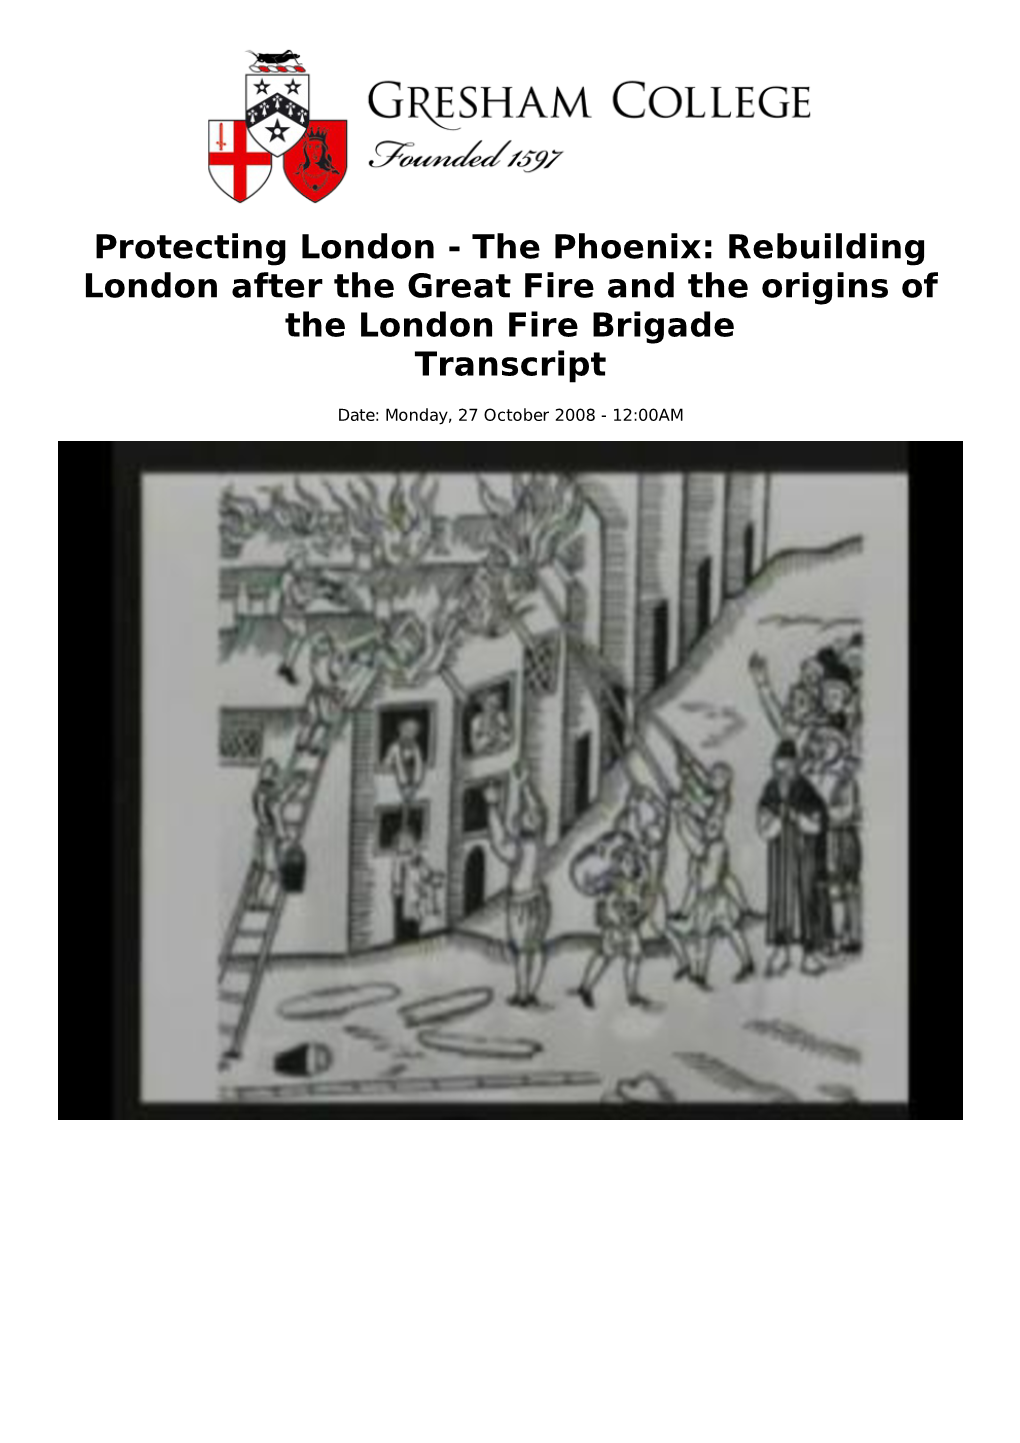 The Phoenix: Rebuilding London After the Great Fire and the Origins of the London Fire Brigade Transcript